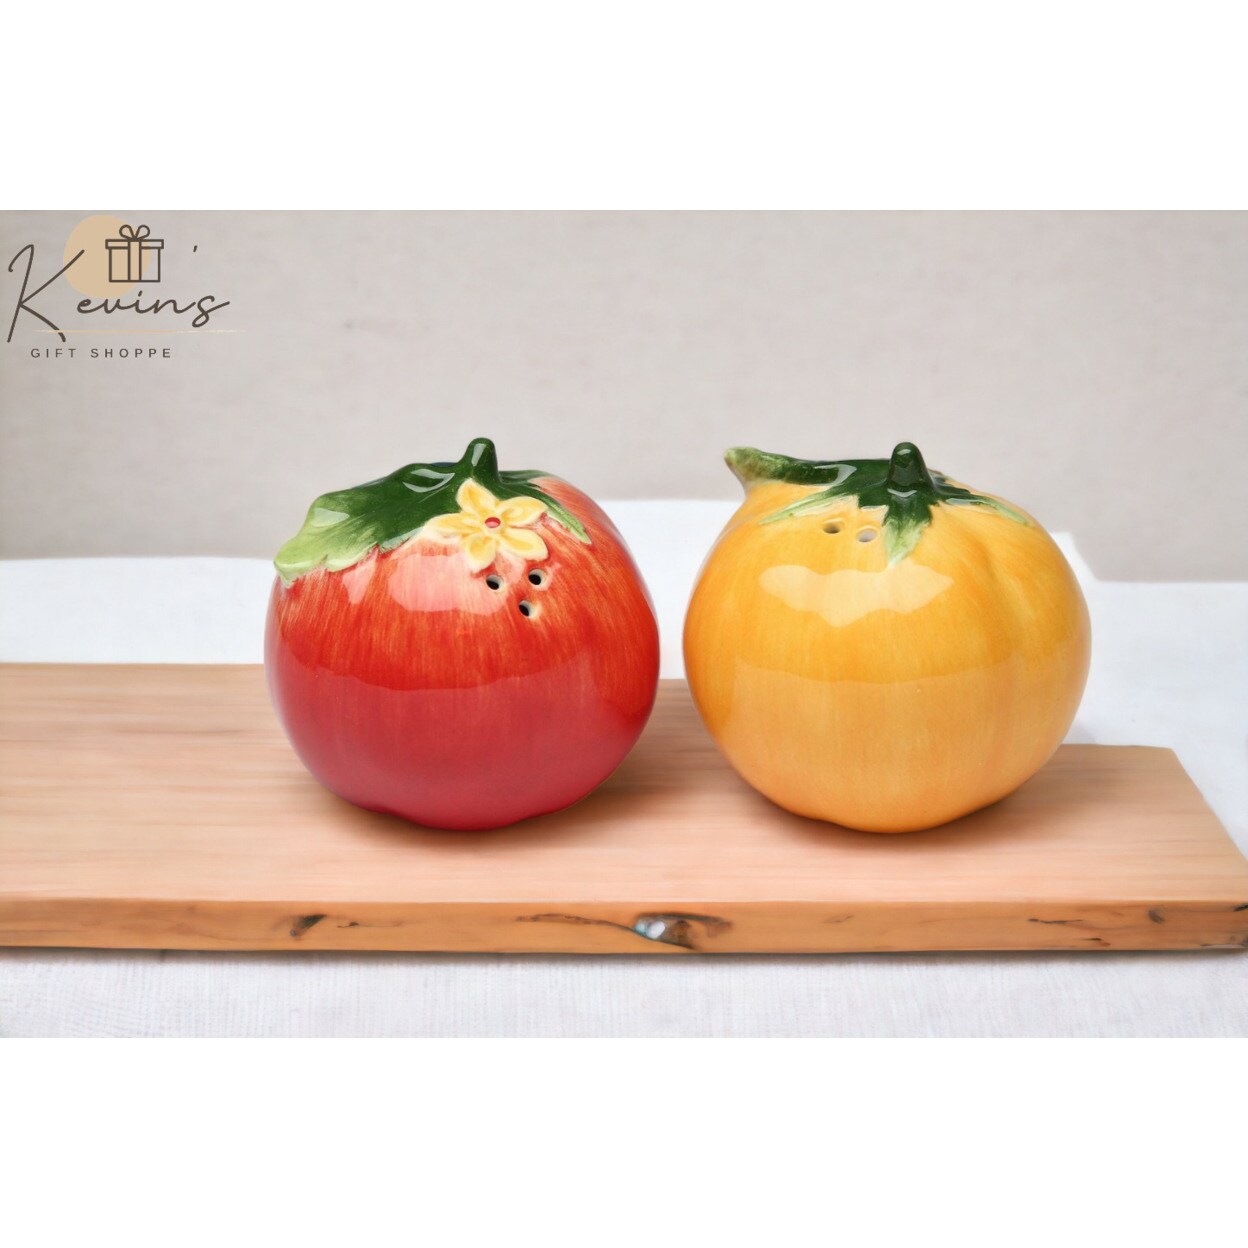 kevinsgiftshoppe Hand Painted Ceramic Tomato Salt and Pepper Shakers Home Decor   Kitchen Decor Farmhouse Decor